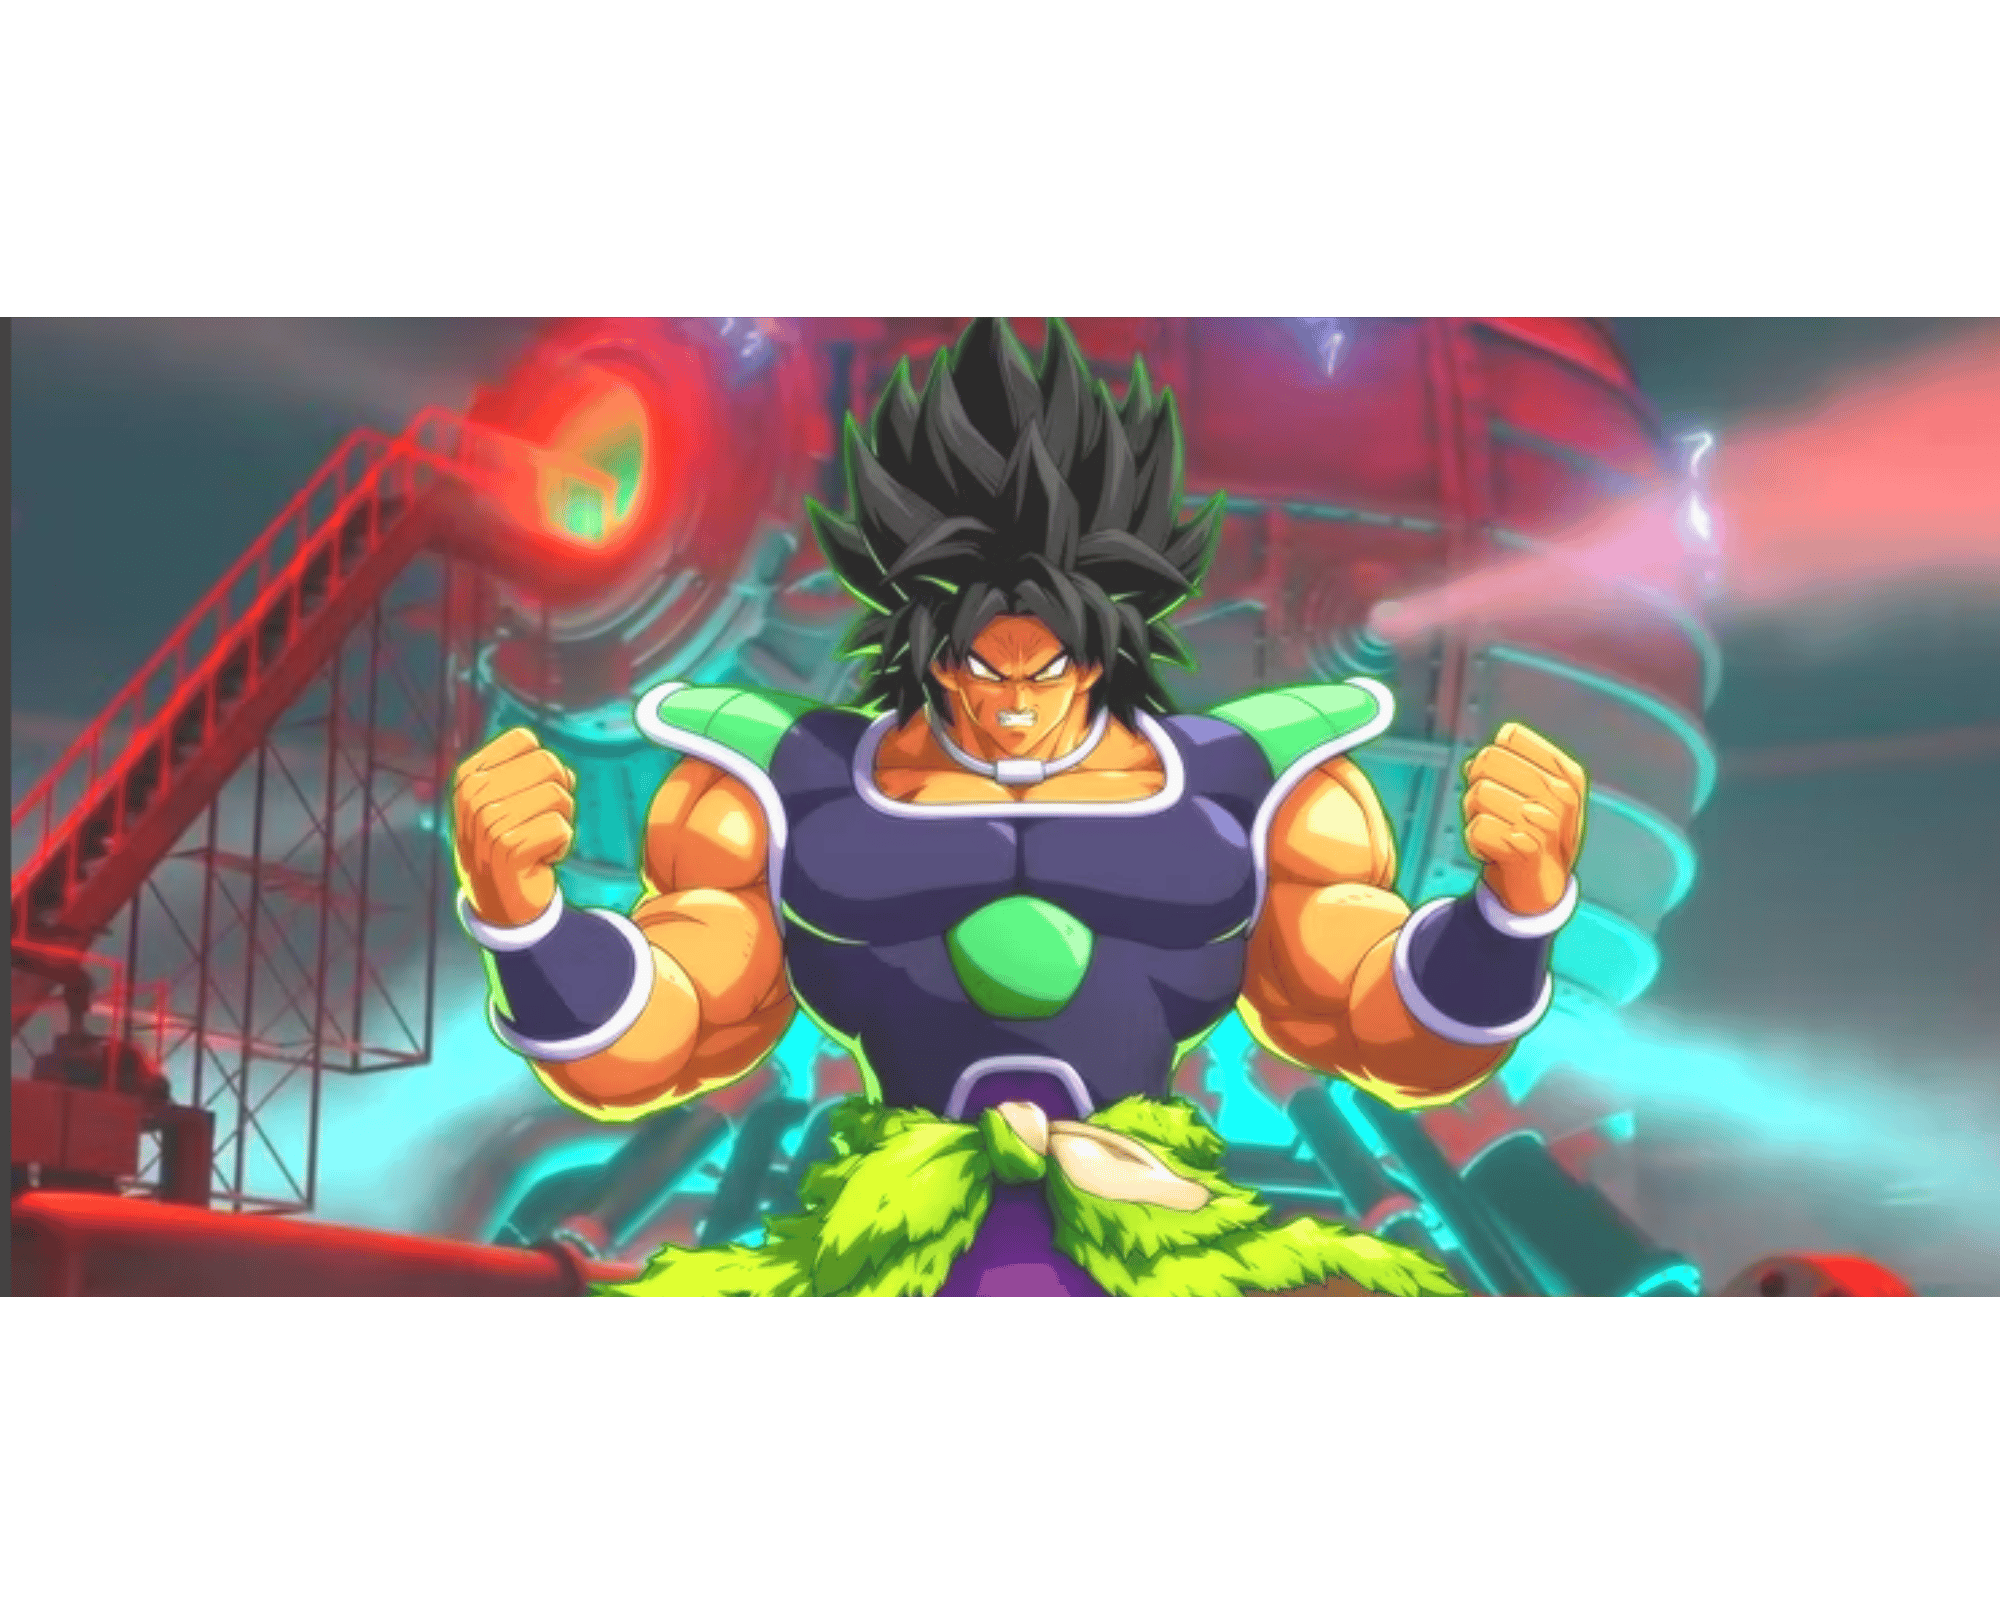 Broly meilleur que Cell Max